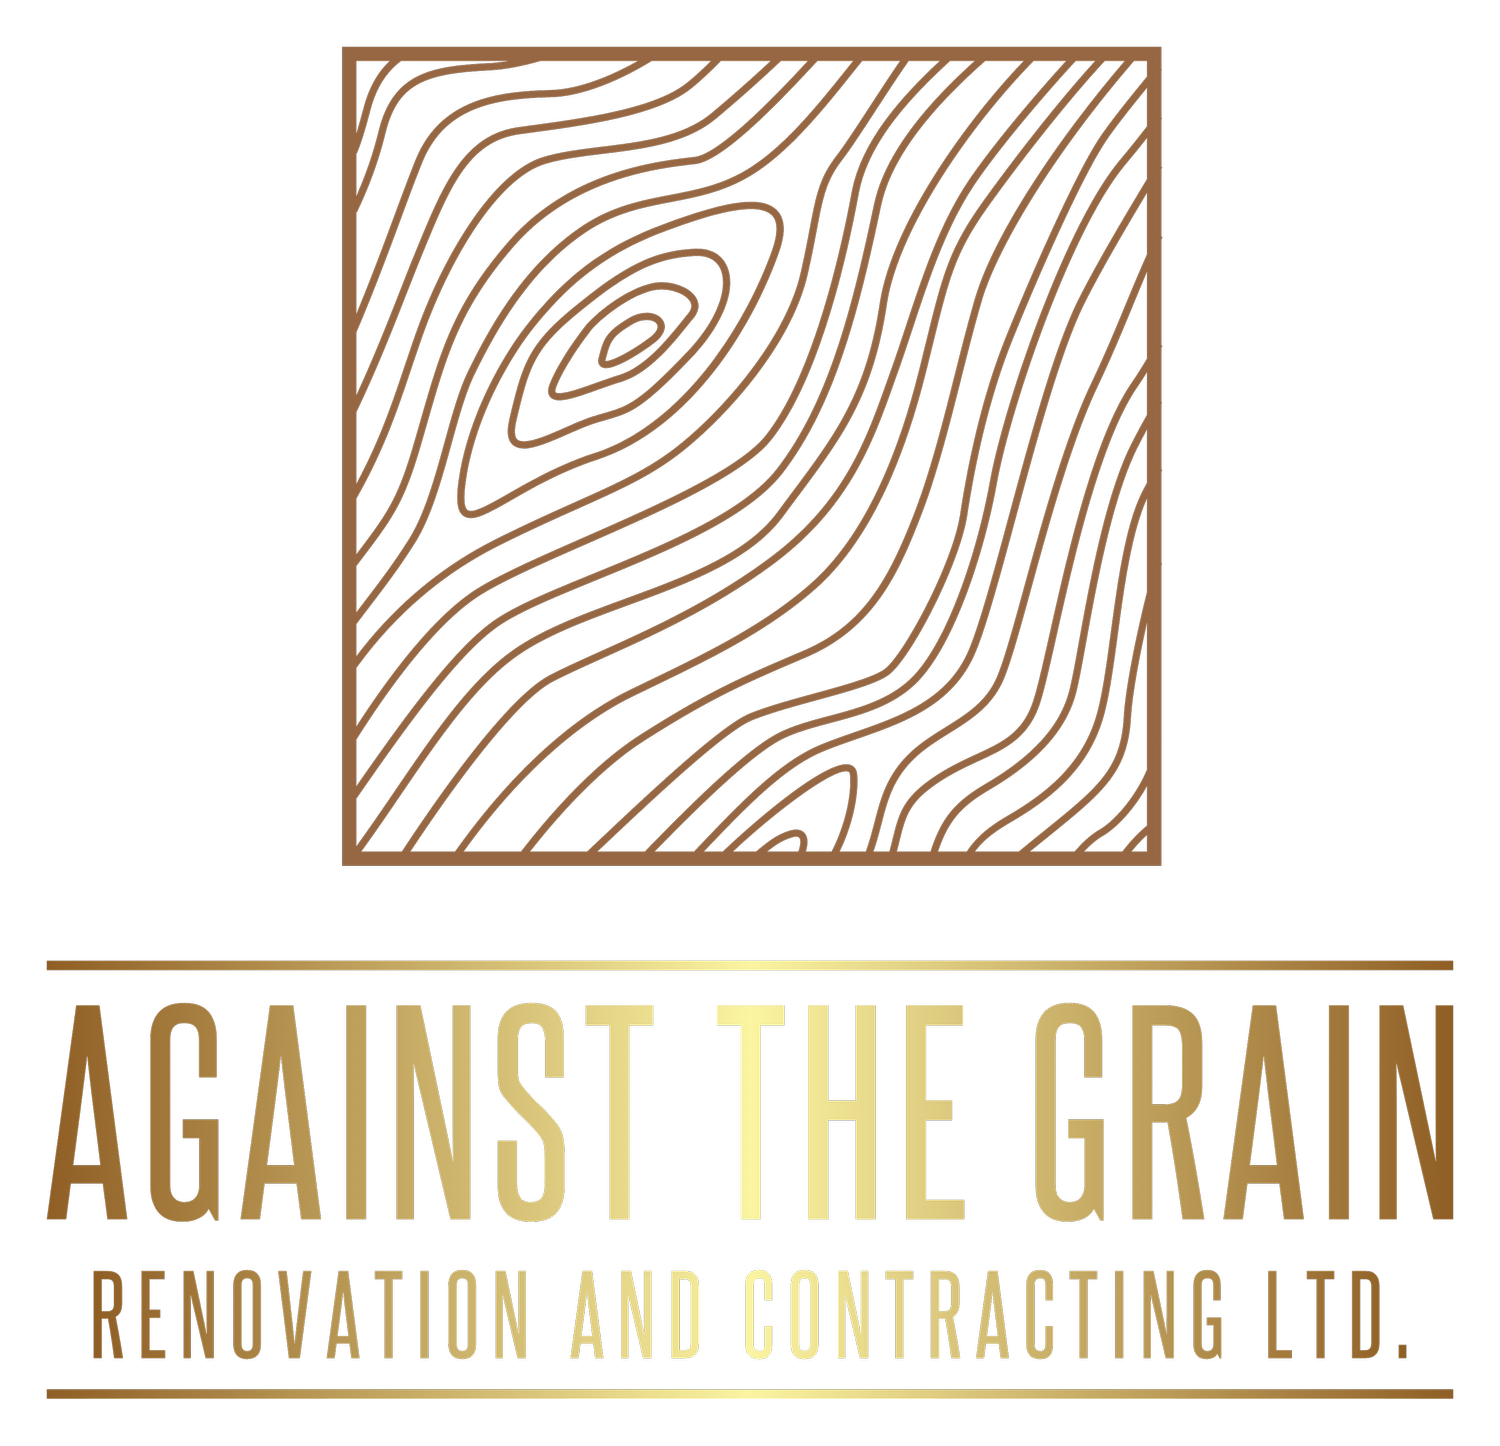 Against The Grain Renovation and Contracting Ltd.